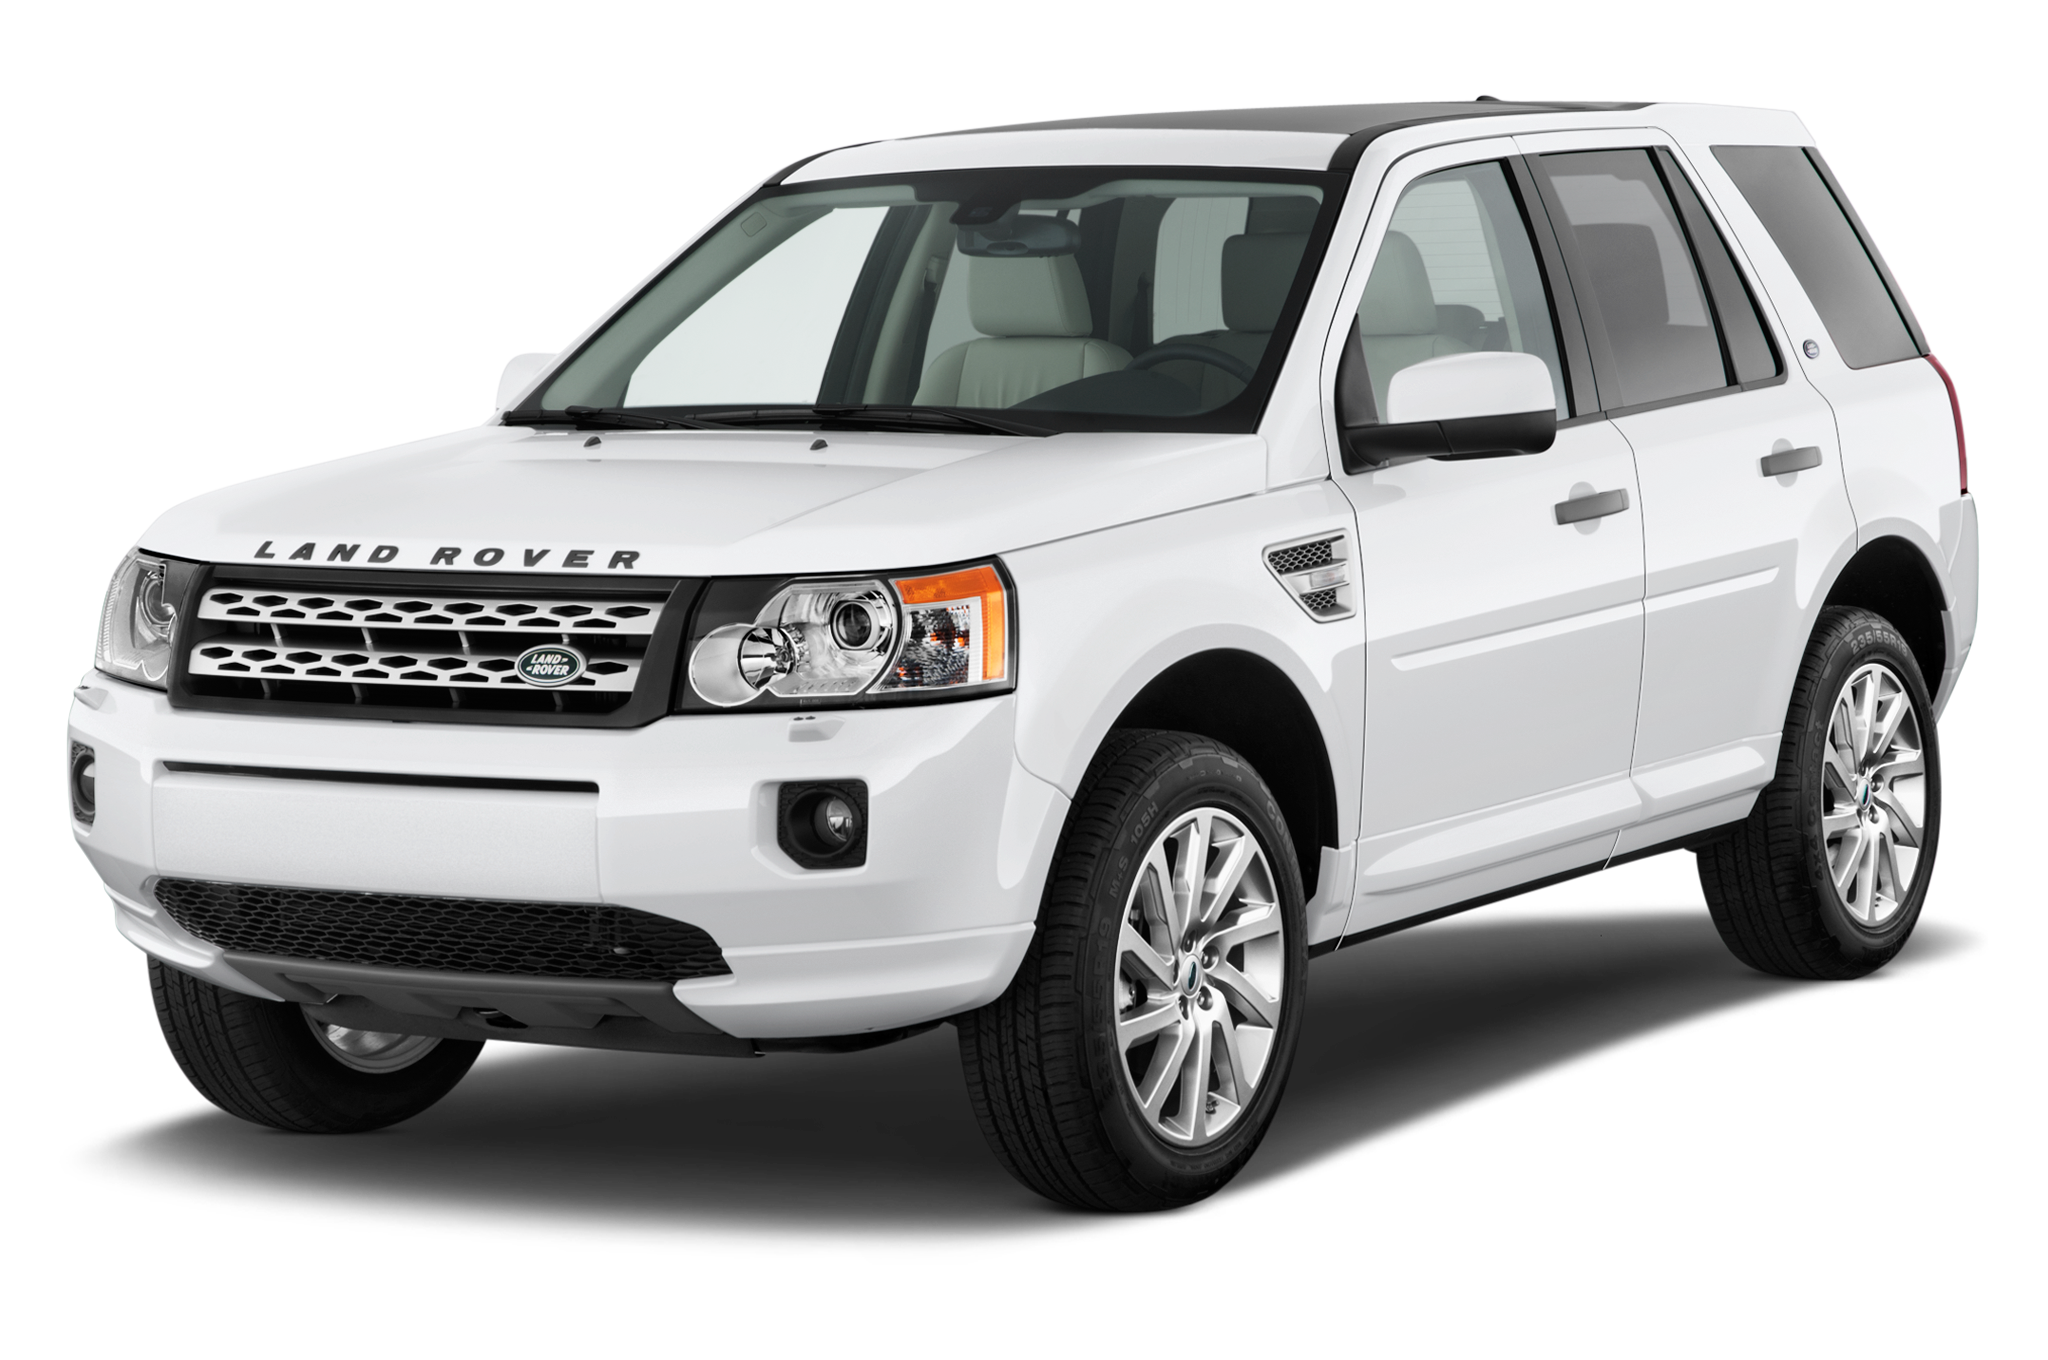 Land Rover PNG images 